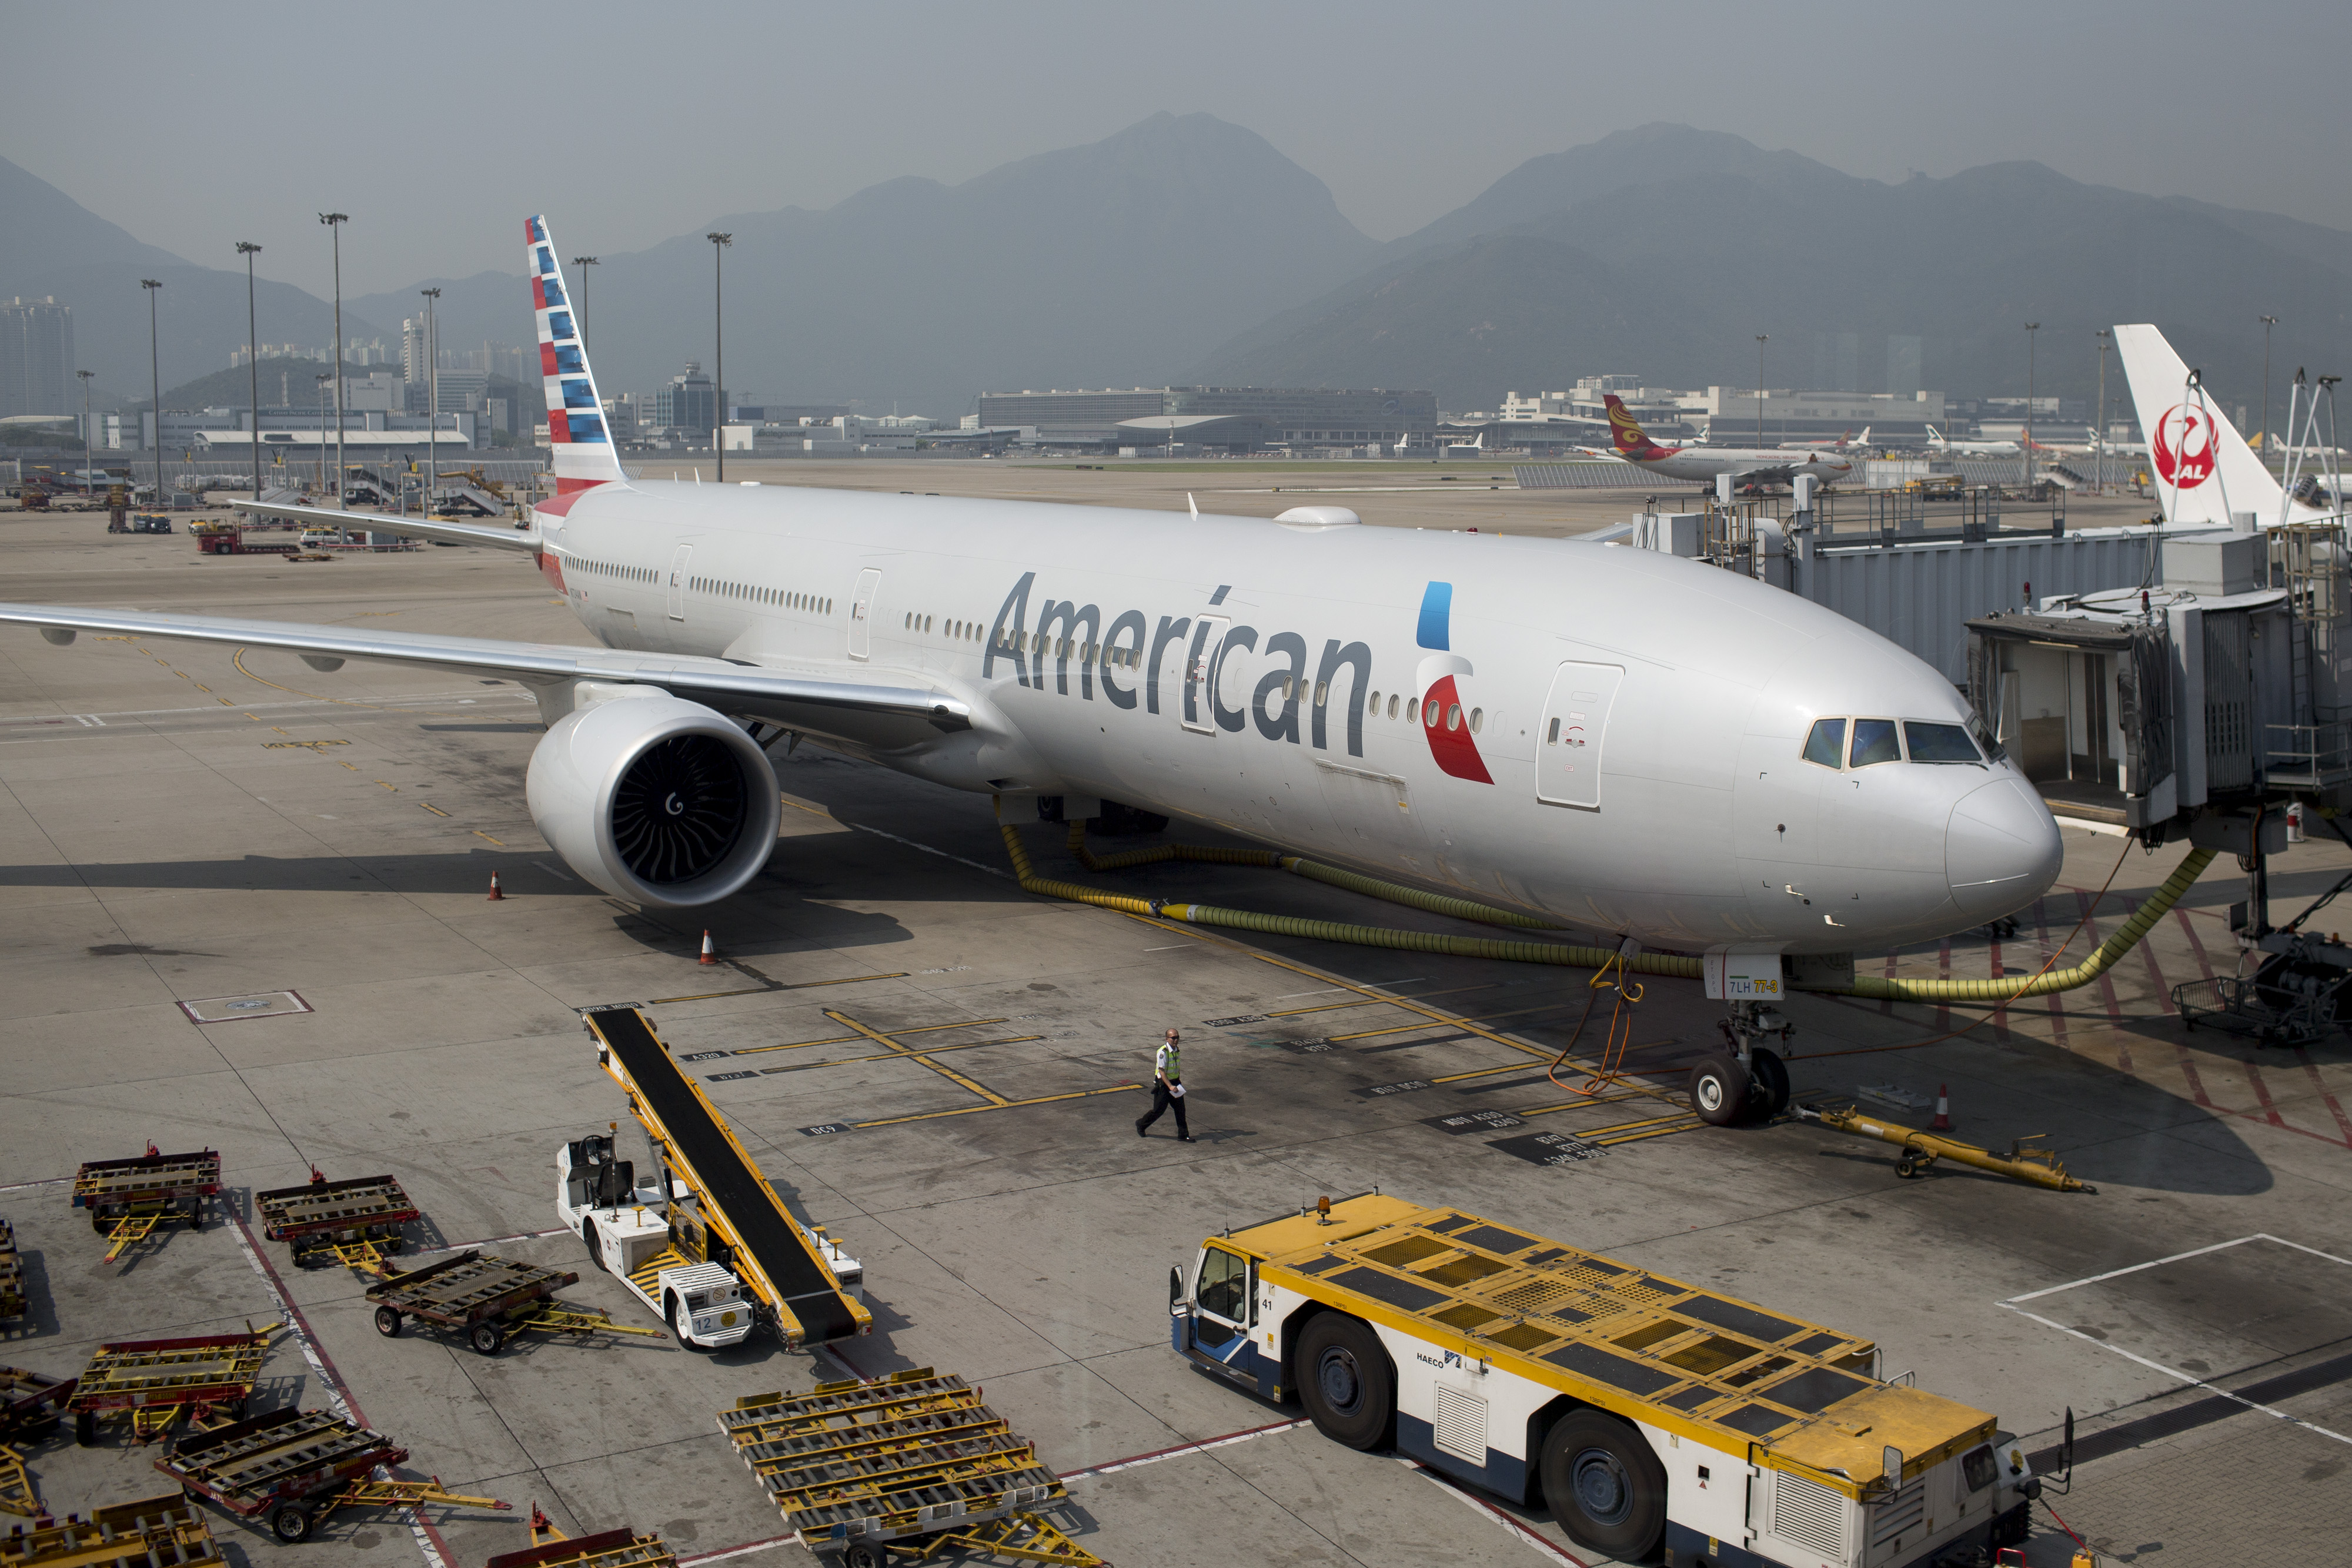 An American Airlines Boeing 777 aircraft sits at Hong Kong International Airport in Hong Kong on June 13, 2014. (Brent Lewin/Bloomberg—Getty Images)